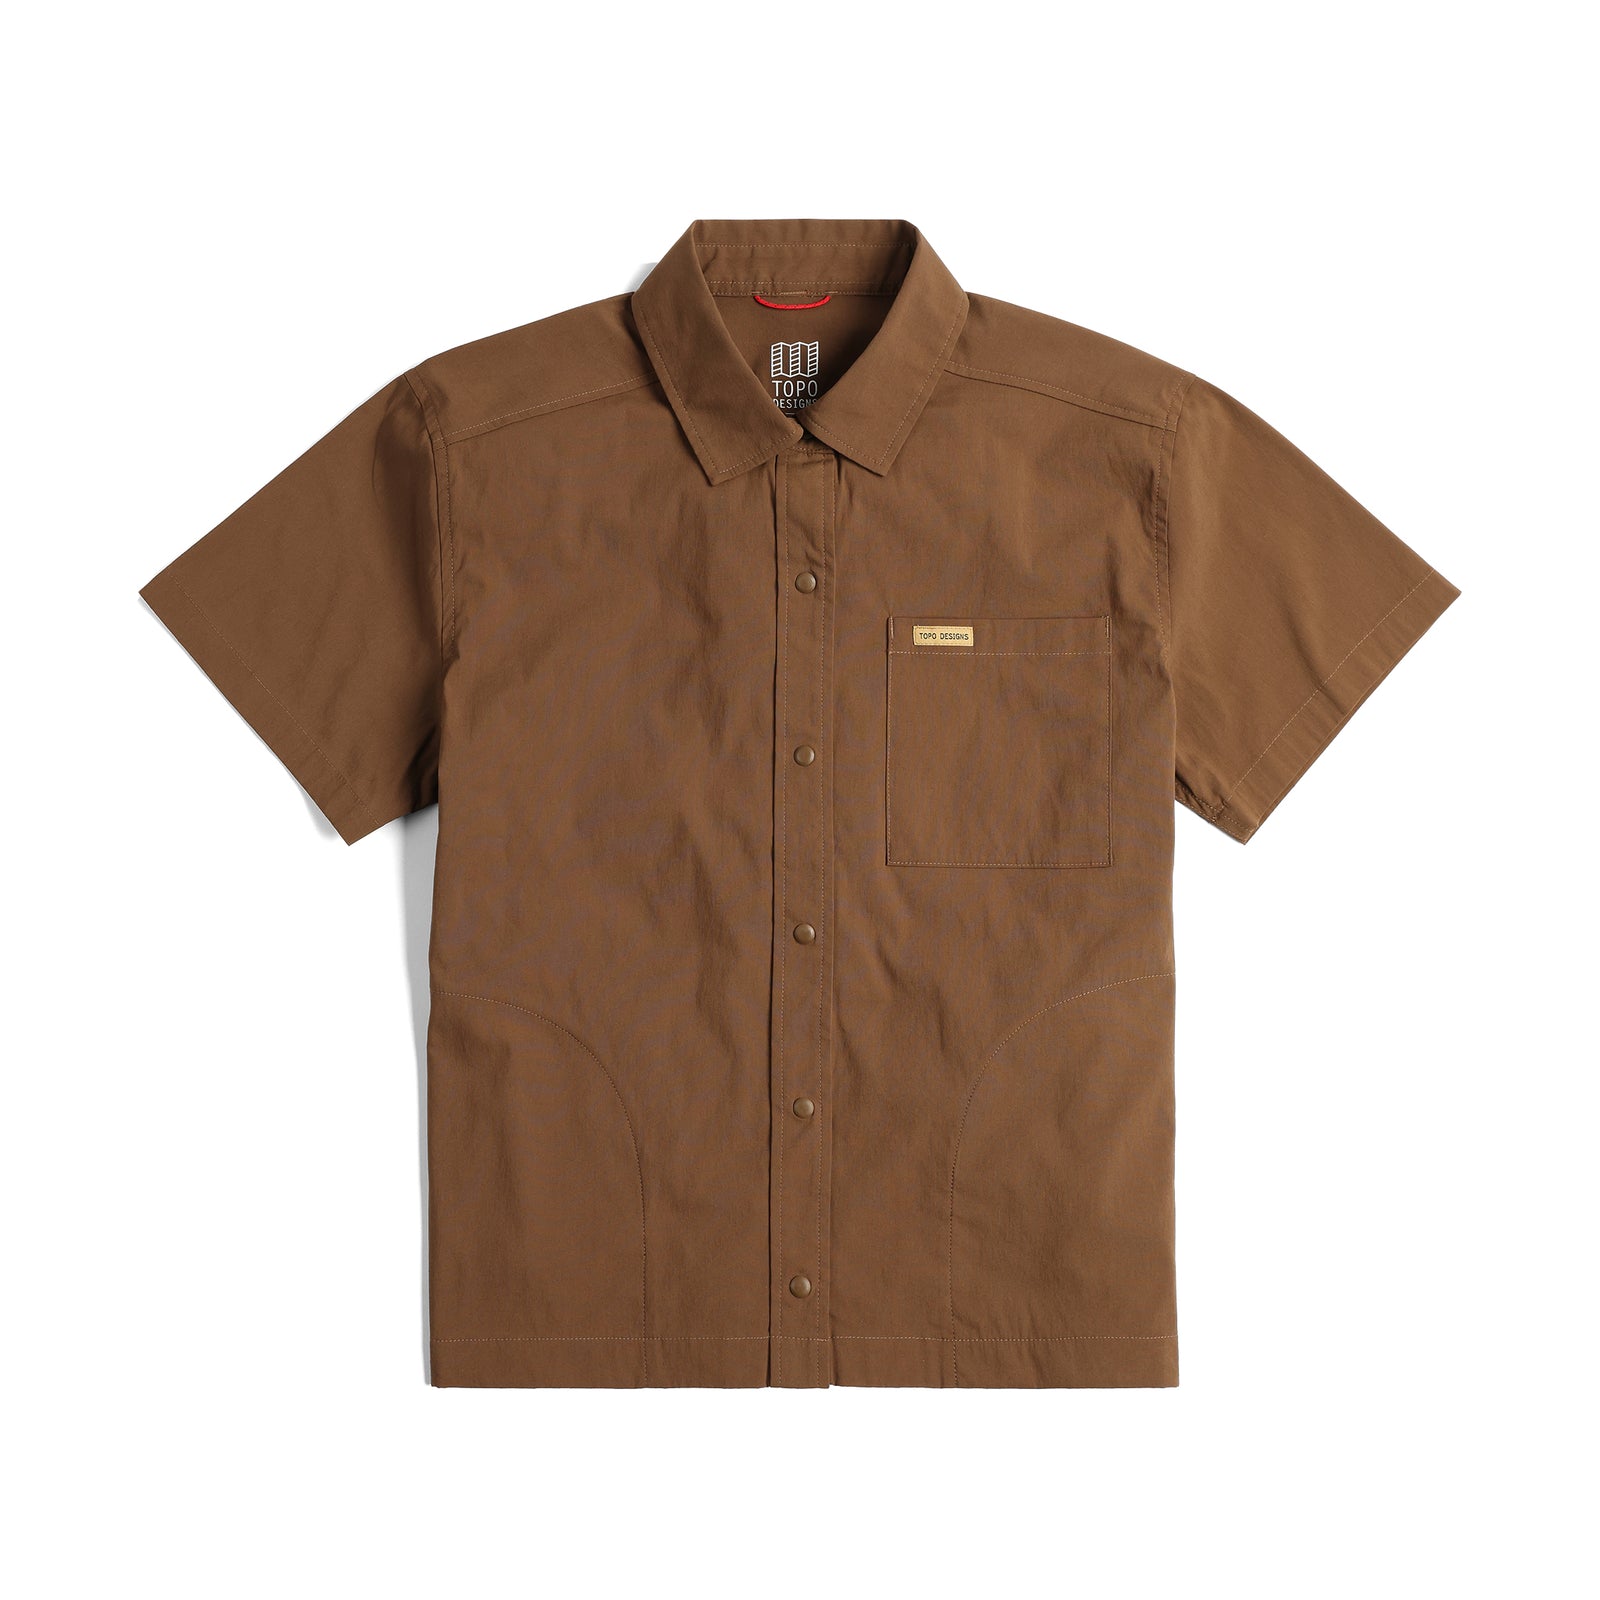 Front View of Topo Designs Global Shirt - Short Sleeve - Women's in "Desert Palm"